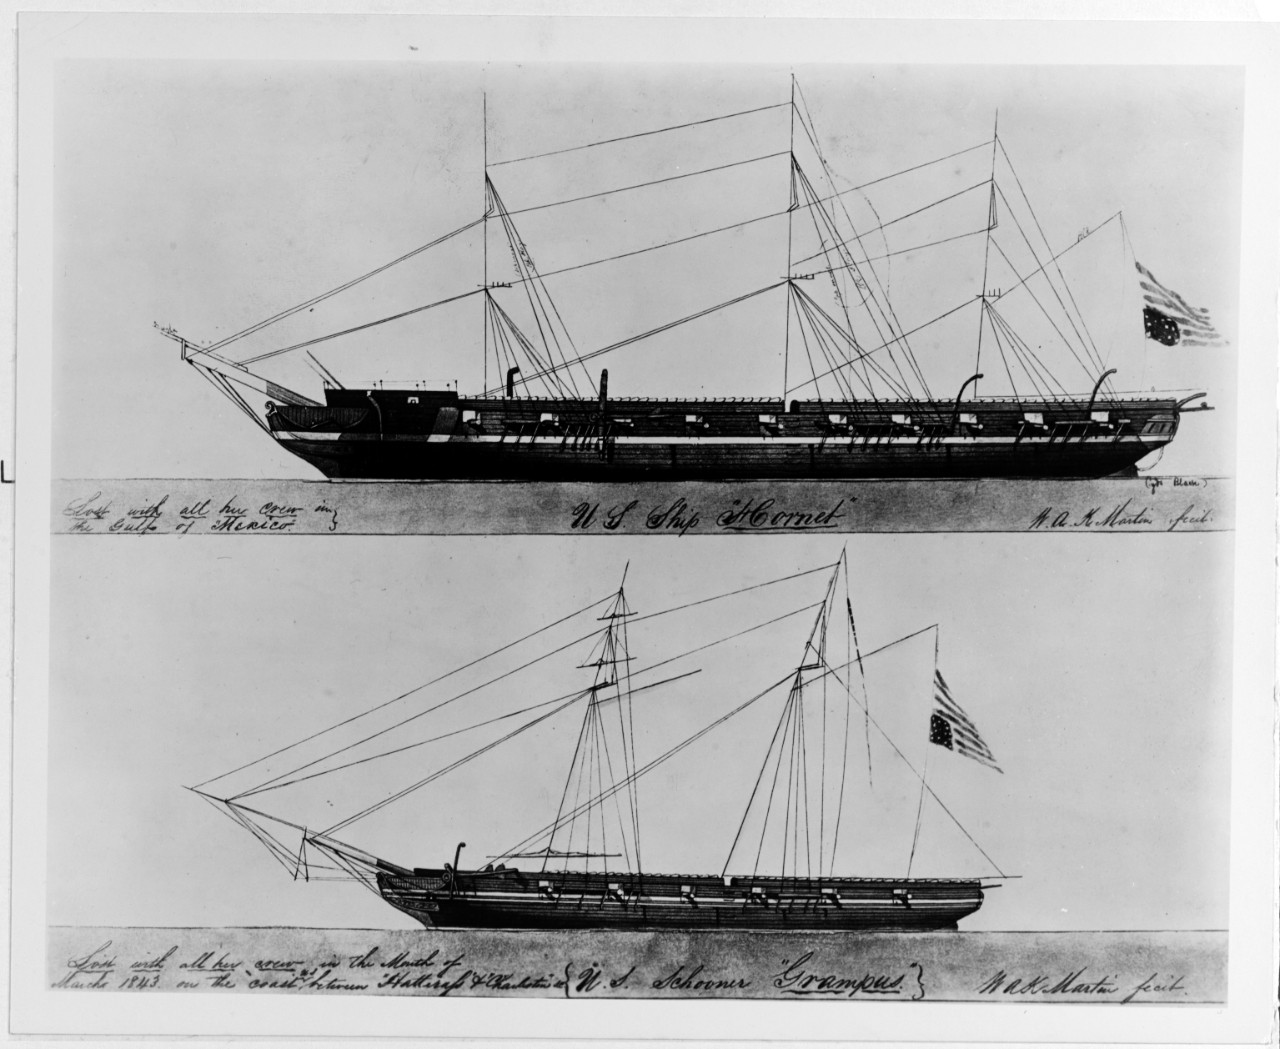 Schooner Grampus pictured on the bottom in this sketch of hulls and rigging by William A. K. Martin, 1843. (NH 86236)